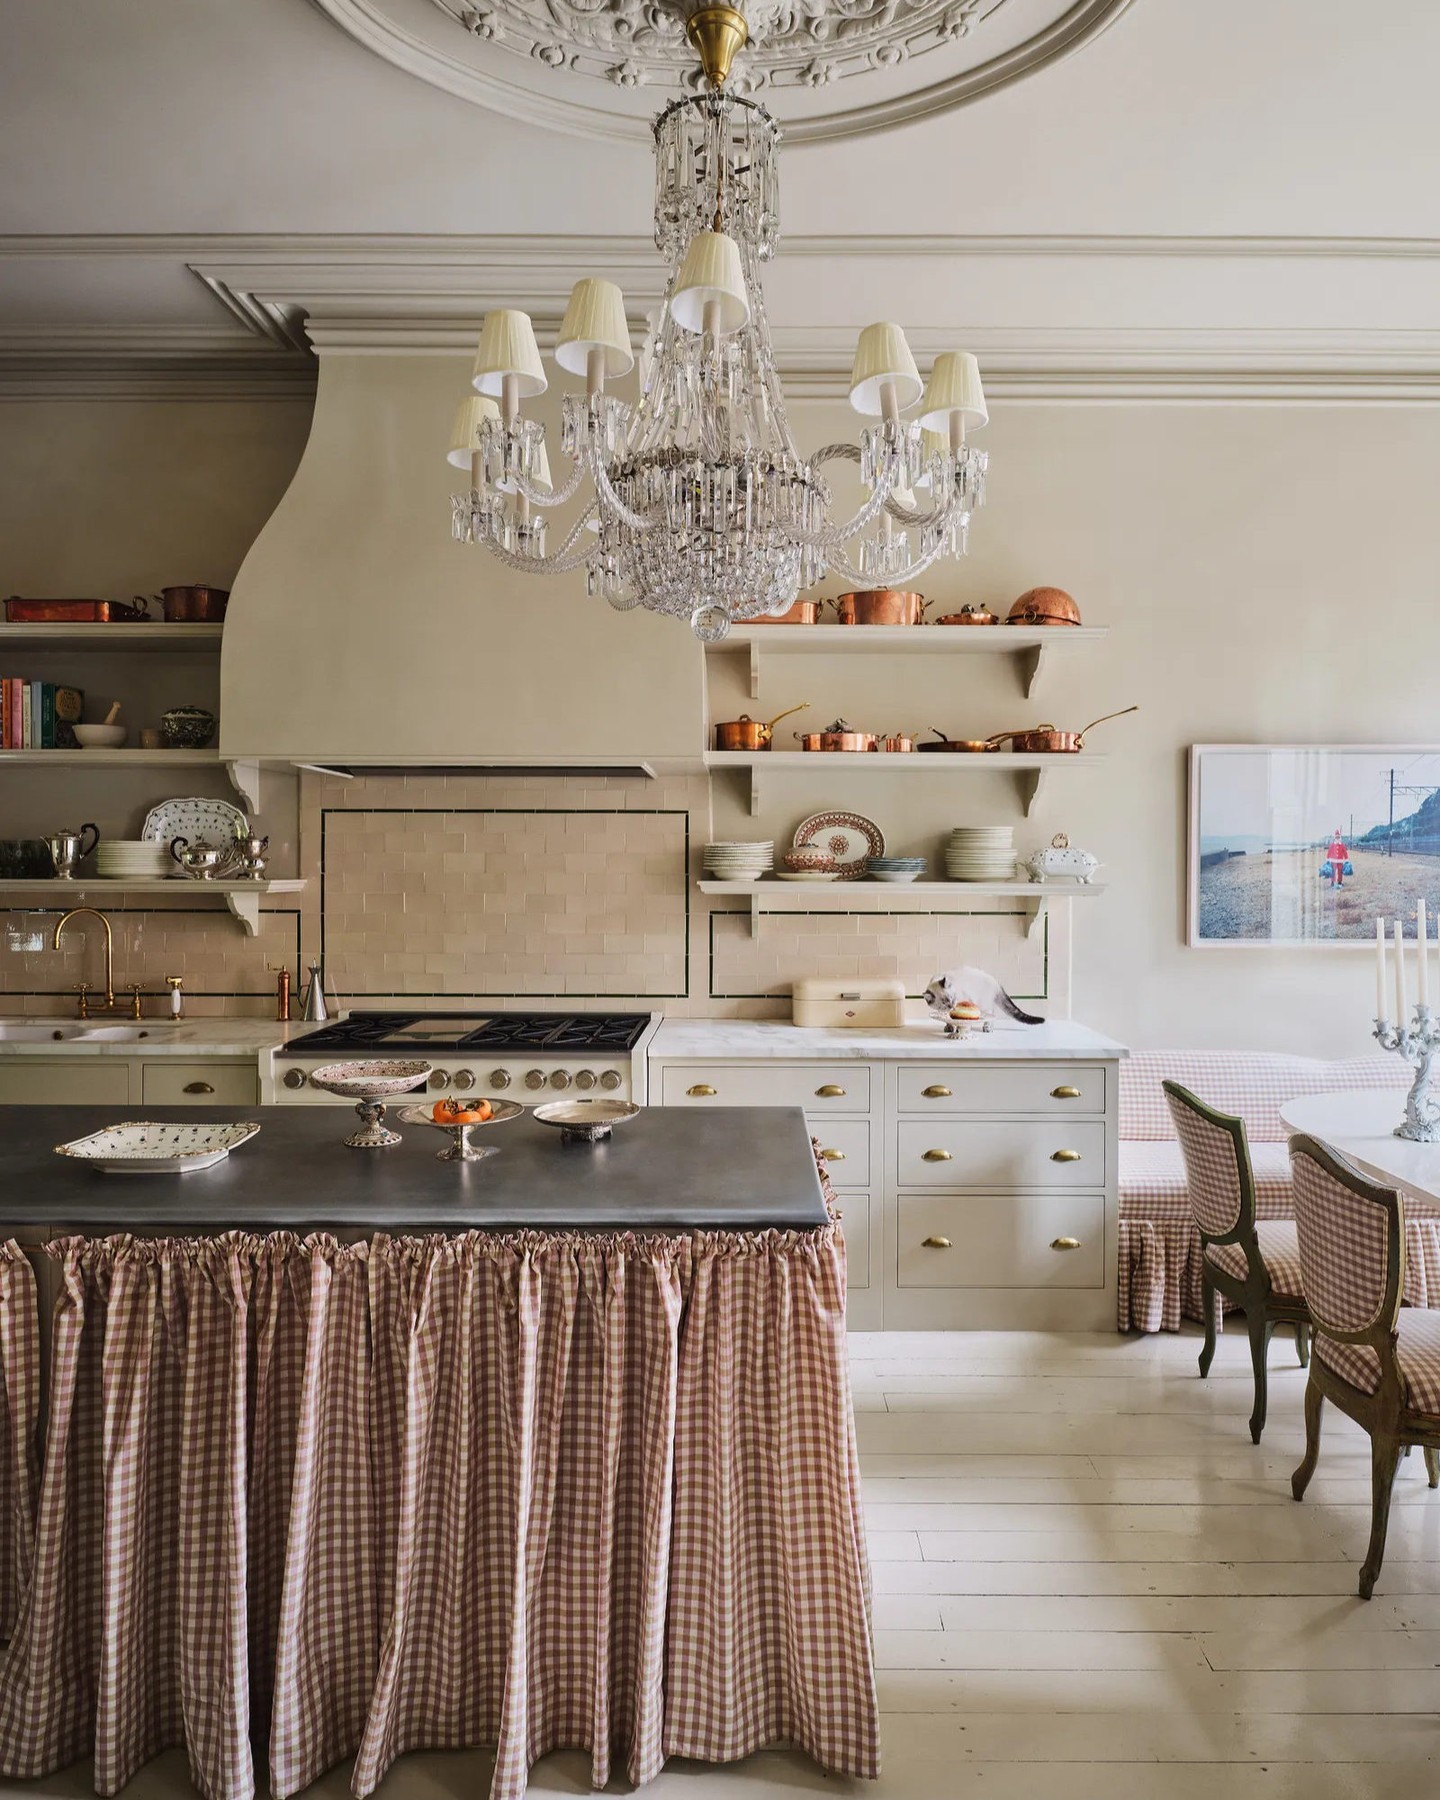 English Country Kitchens: The New Trend In Home Decor